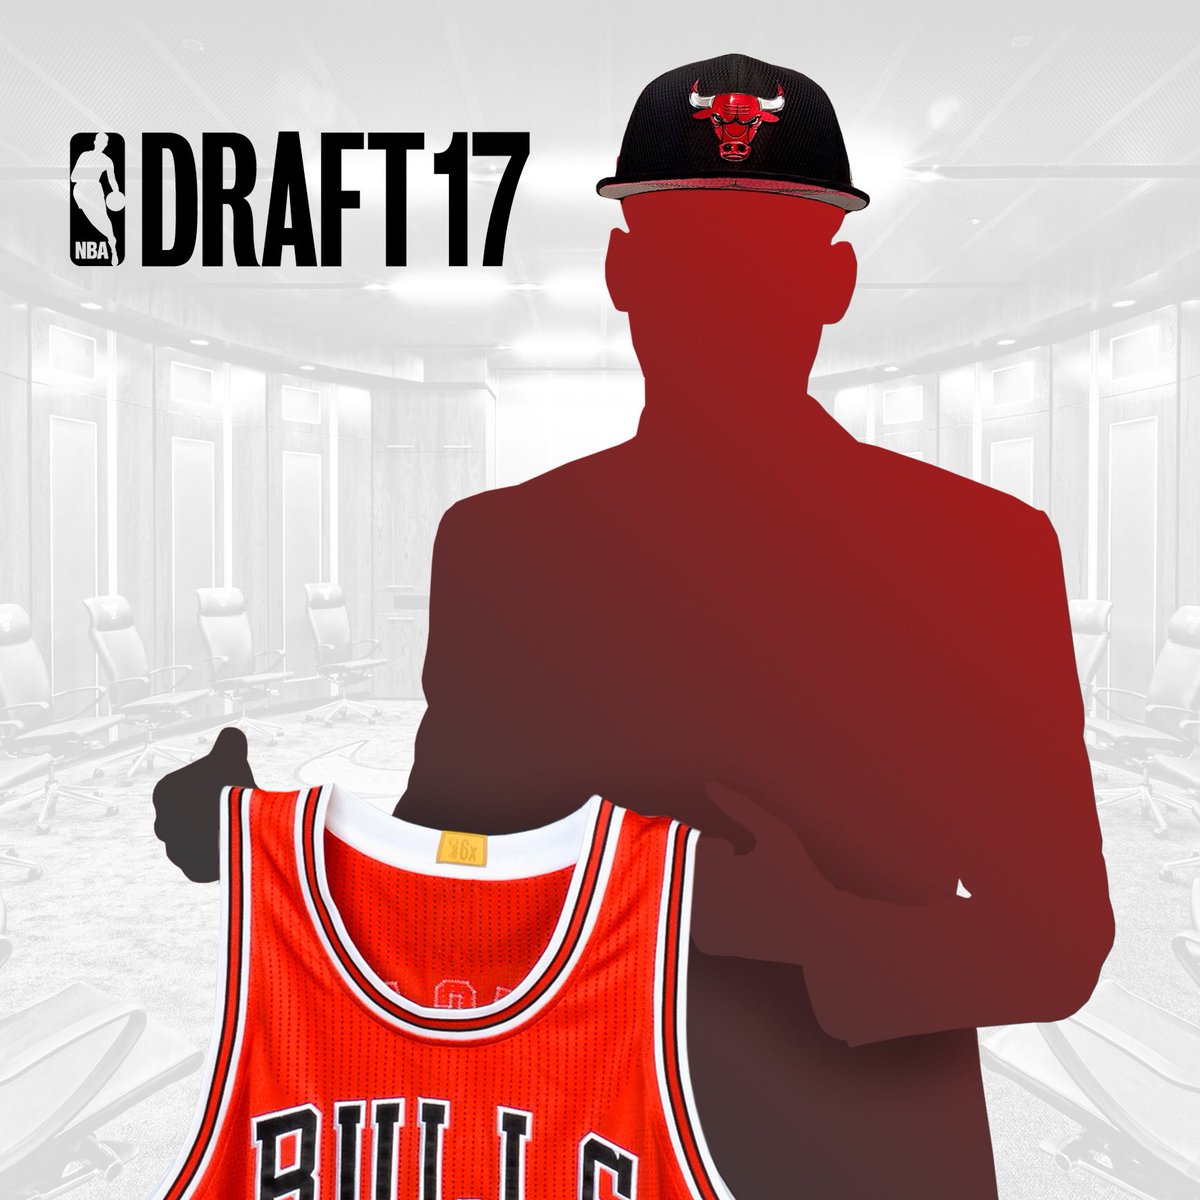 The #NBADraft is tonight! Who will the #Bulls select? https://t.co/HyraCUKjPm